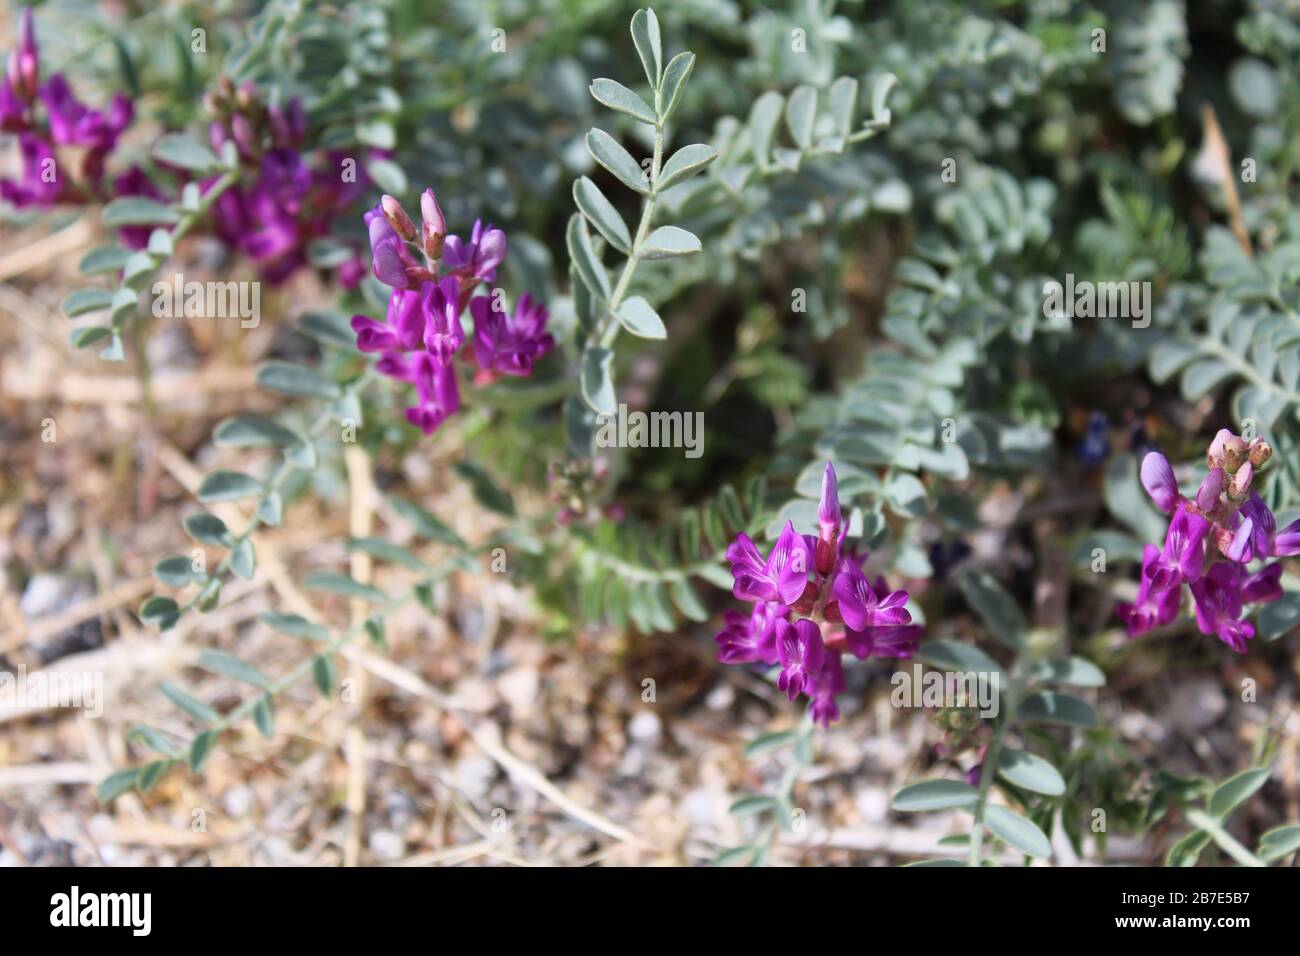 Bright purple flowers emerge in Spring on the small statured Mojave Milkvetch, Astragalus Mohavensis, a plant native to the Southern Mojave Desert. Stock Photo